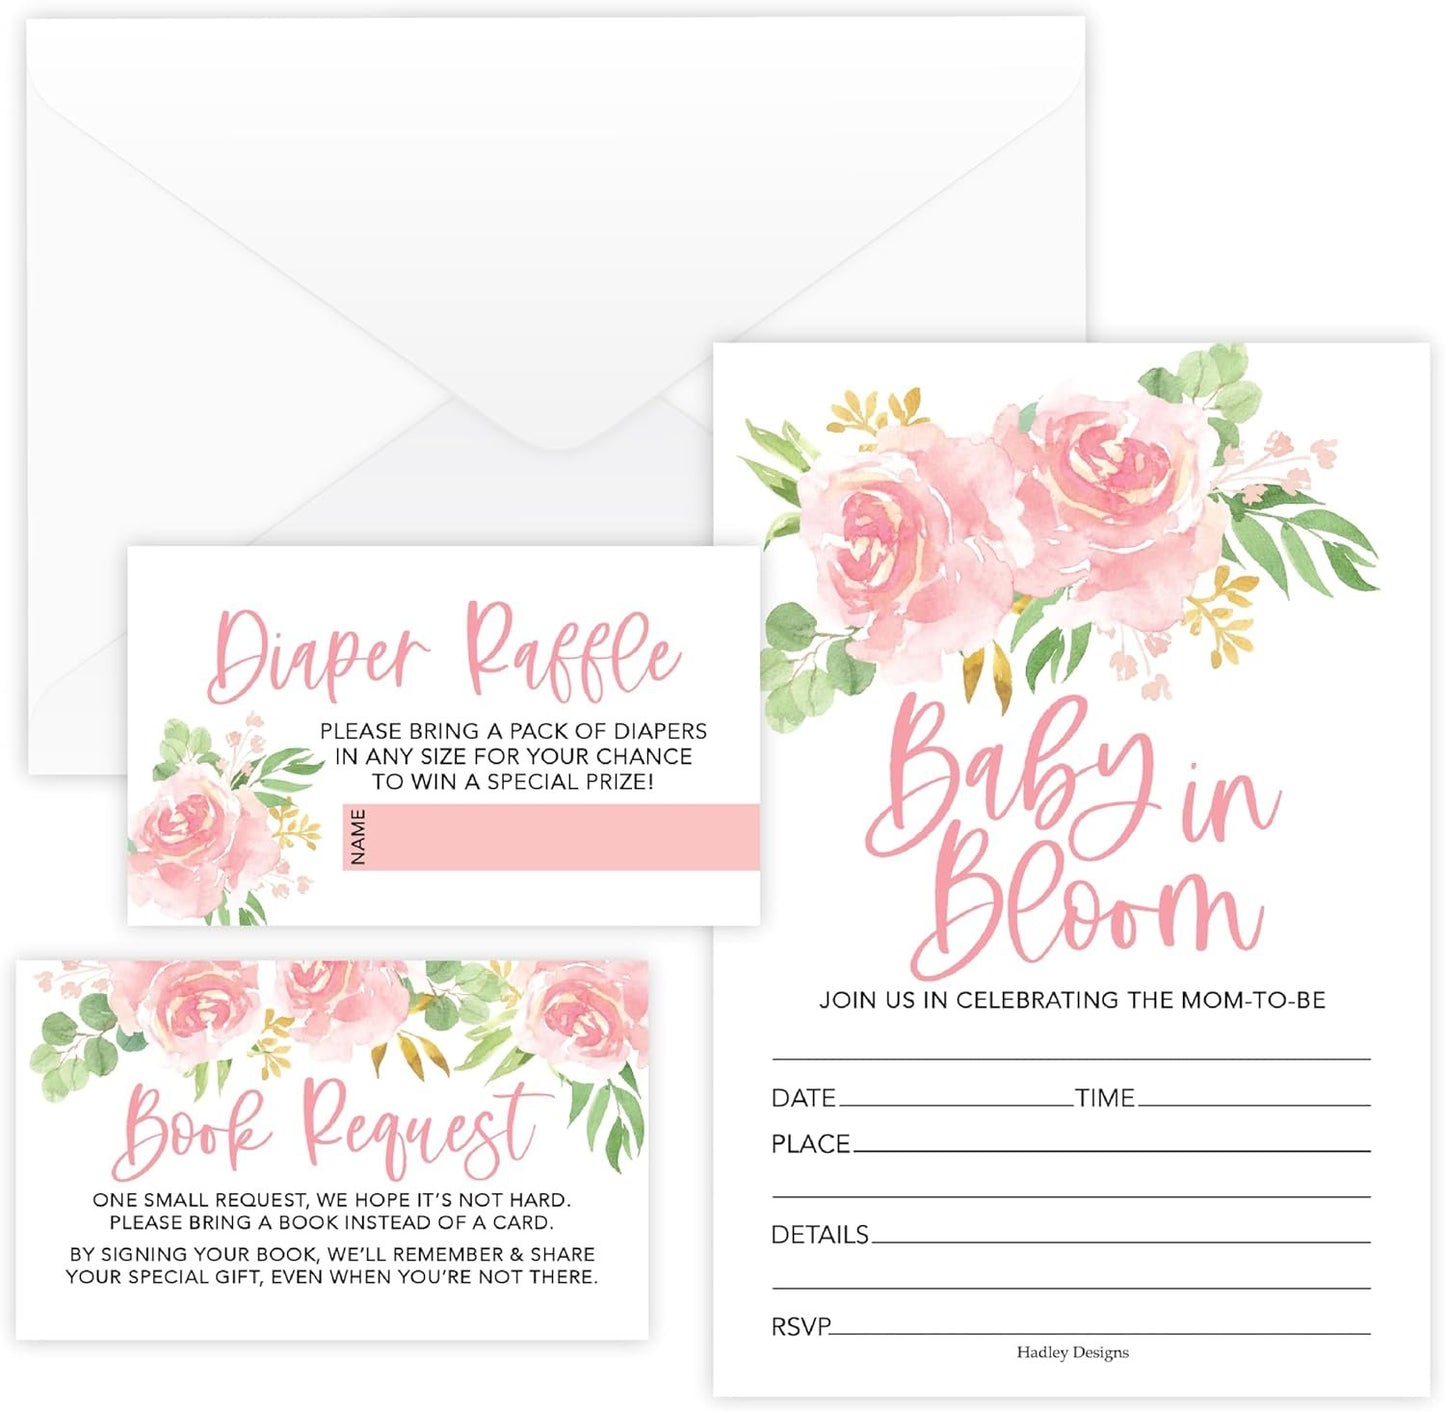 15 Floral Baby Shower Invitations For Girl - Baby Girl Baby Shower Invites For Girl Baby Shower Invitations, Baby Girl Shower Invitations, Invitations For Baby Shower Girl, Baby Invitations